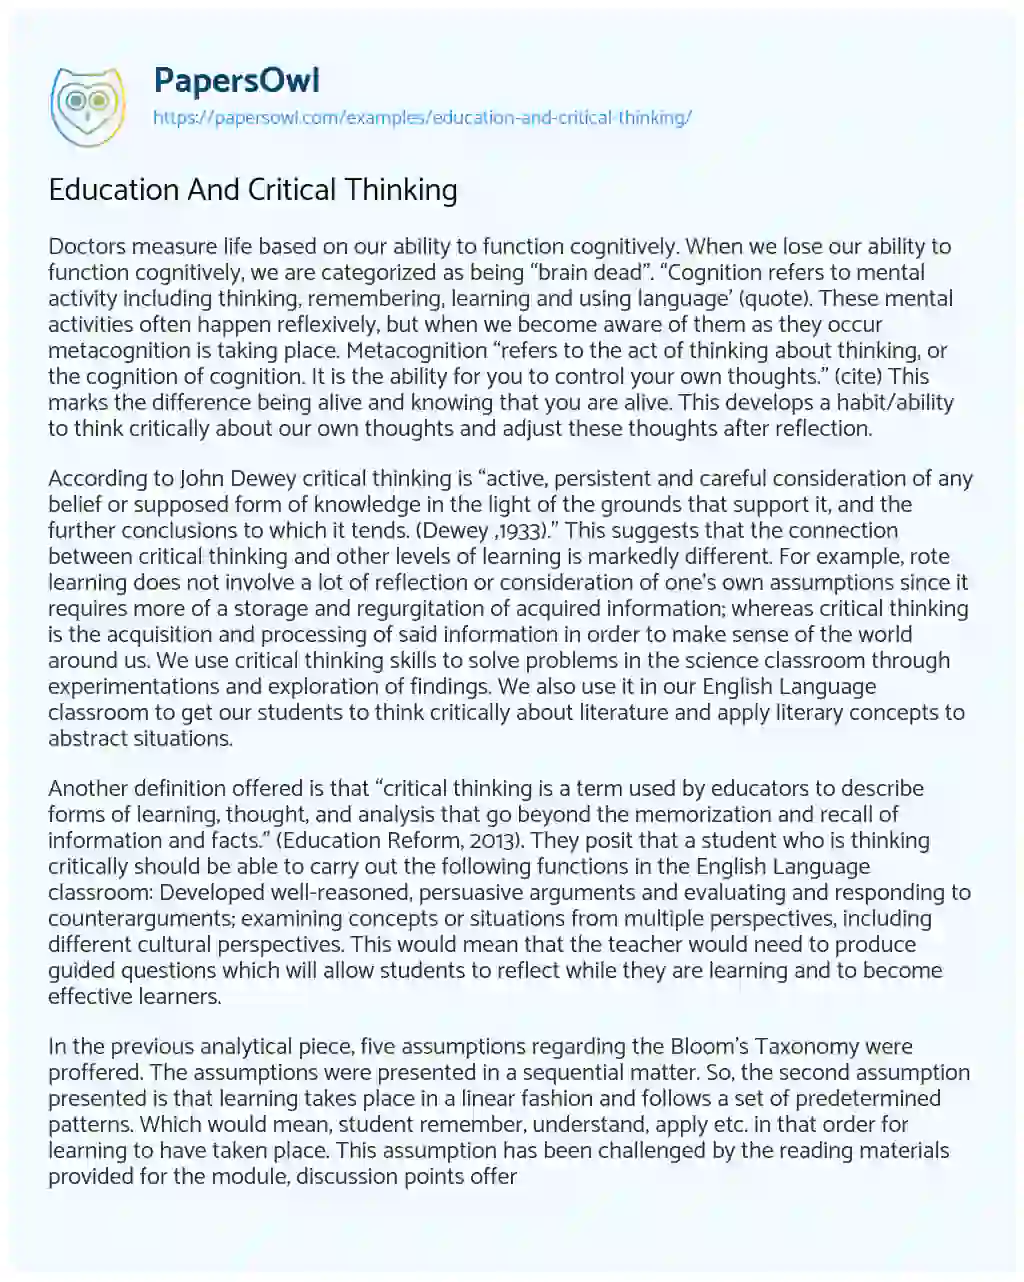 Essay on Education and Critical Thinking